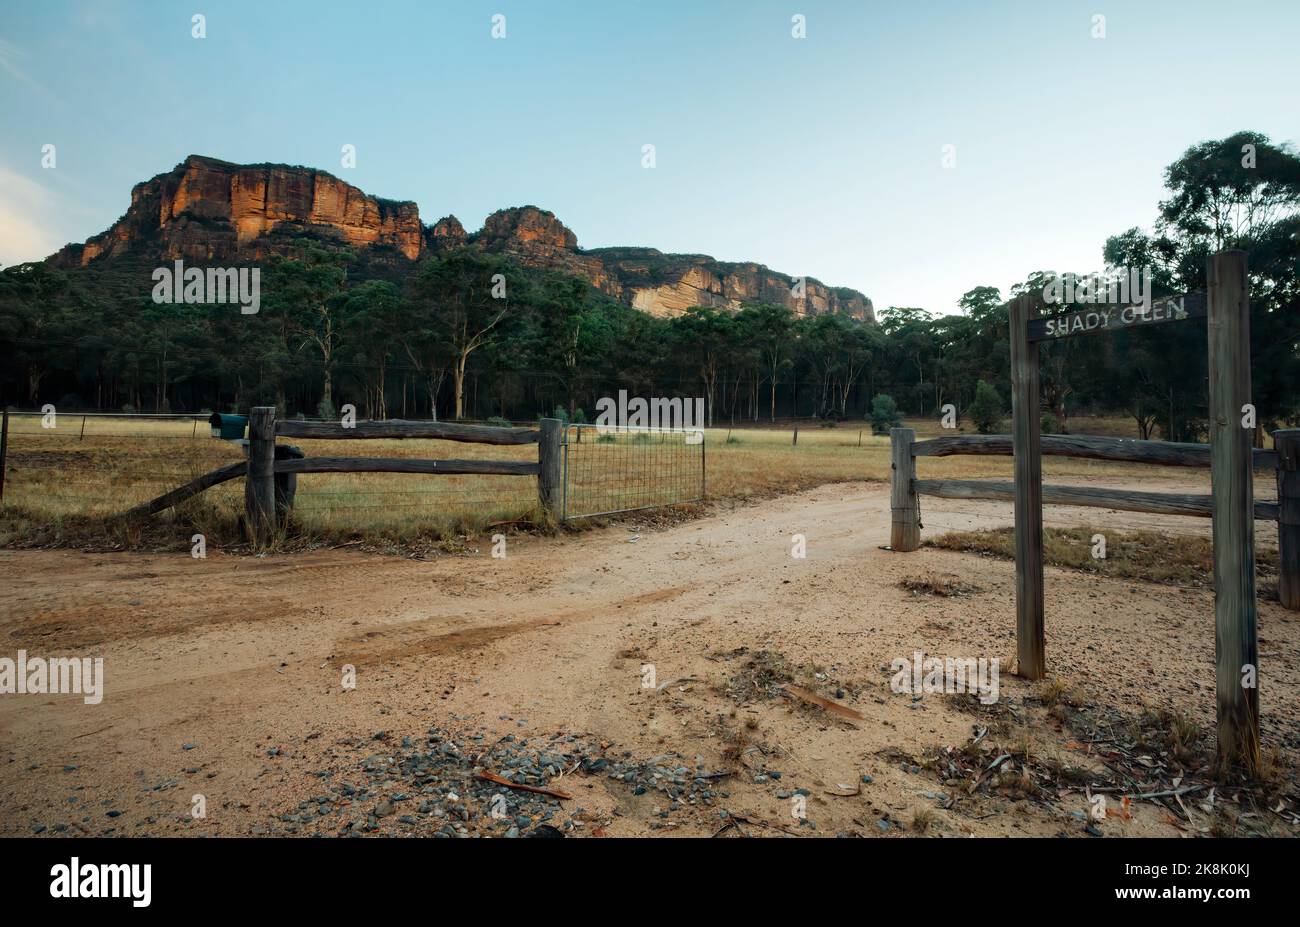 Sheer rsteep ocky mountains rise up from the Capertee Valley on all sides.  An open gate entrance to a farm where cattle grase  the surrounding area i Stock Photo